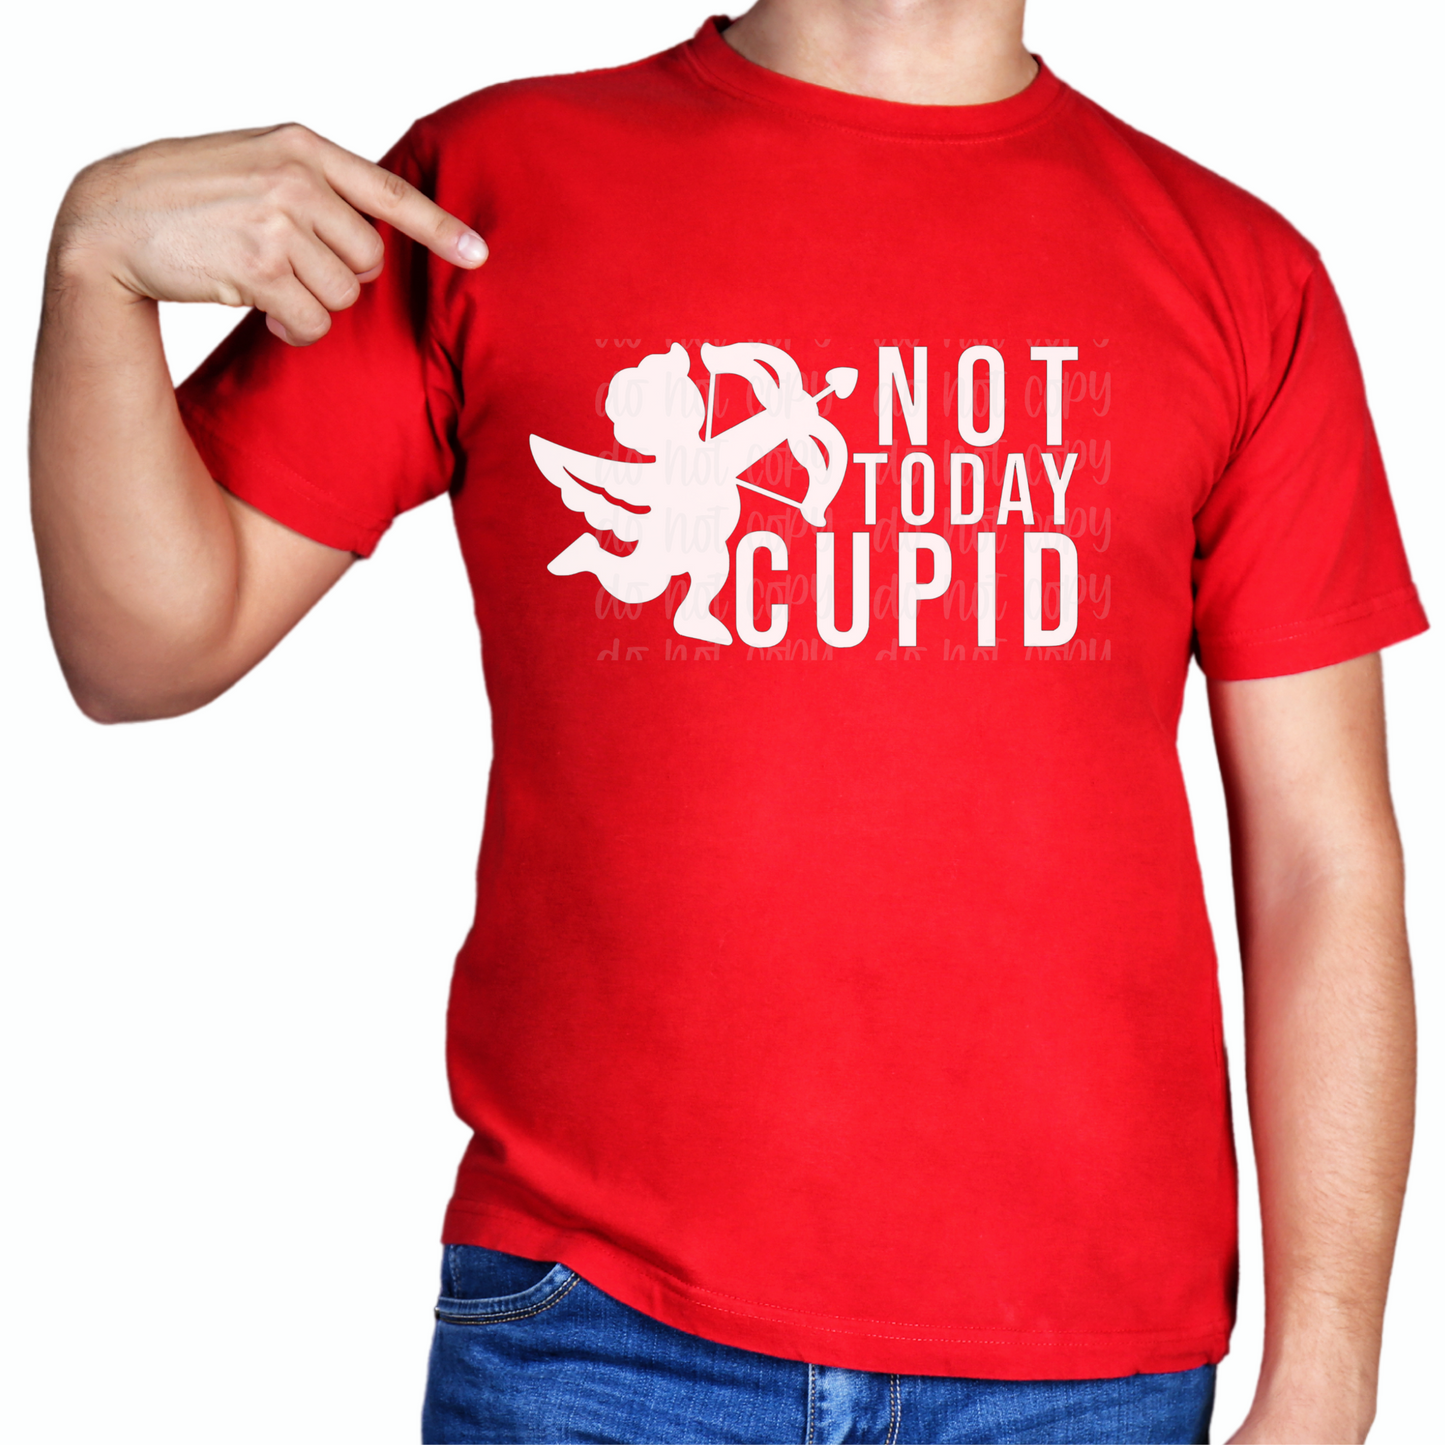 Not Today Cupid Screen Print-SHIRT NOT INCLUDED